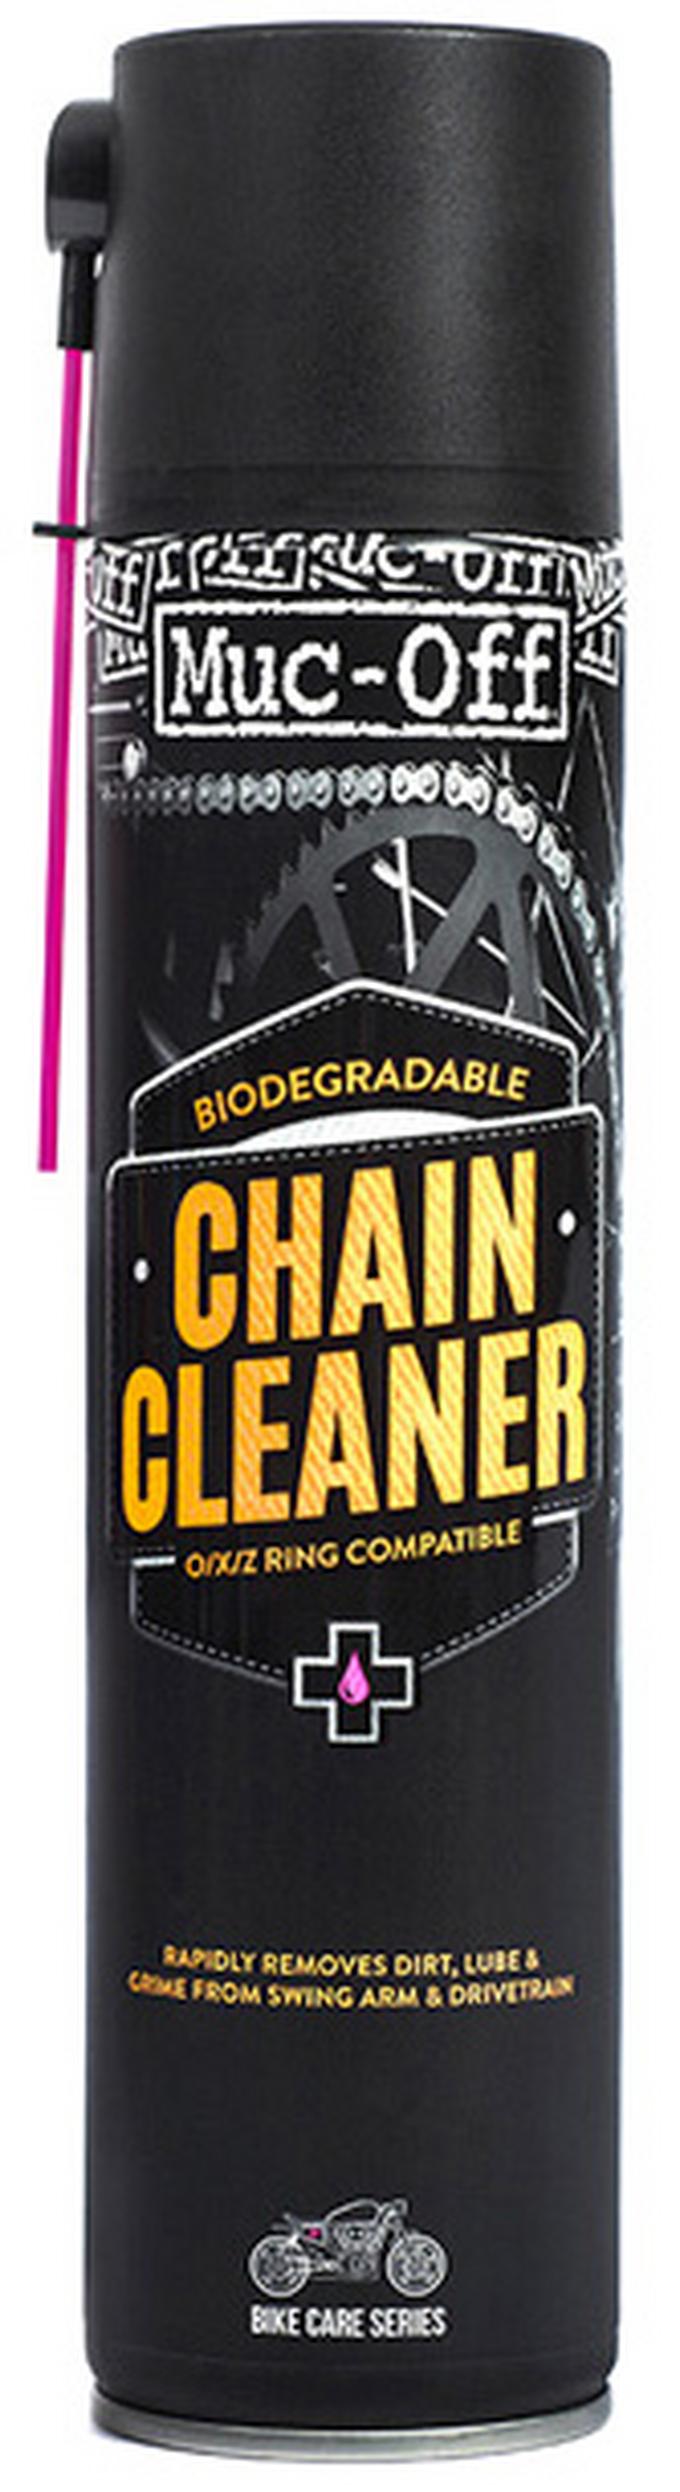 Clean Lube Motorcycle Chain  Motorcycle Chain Cleaner Lube